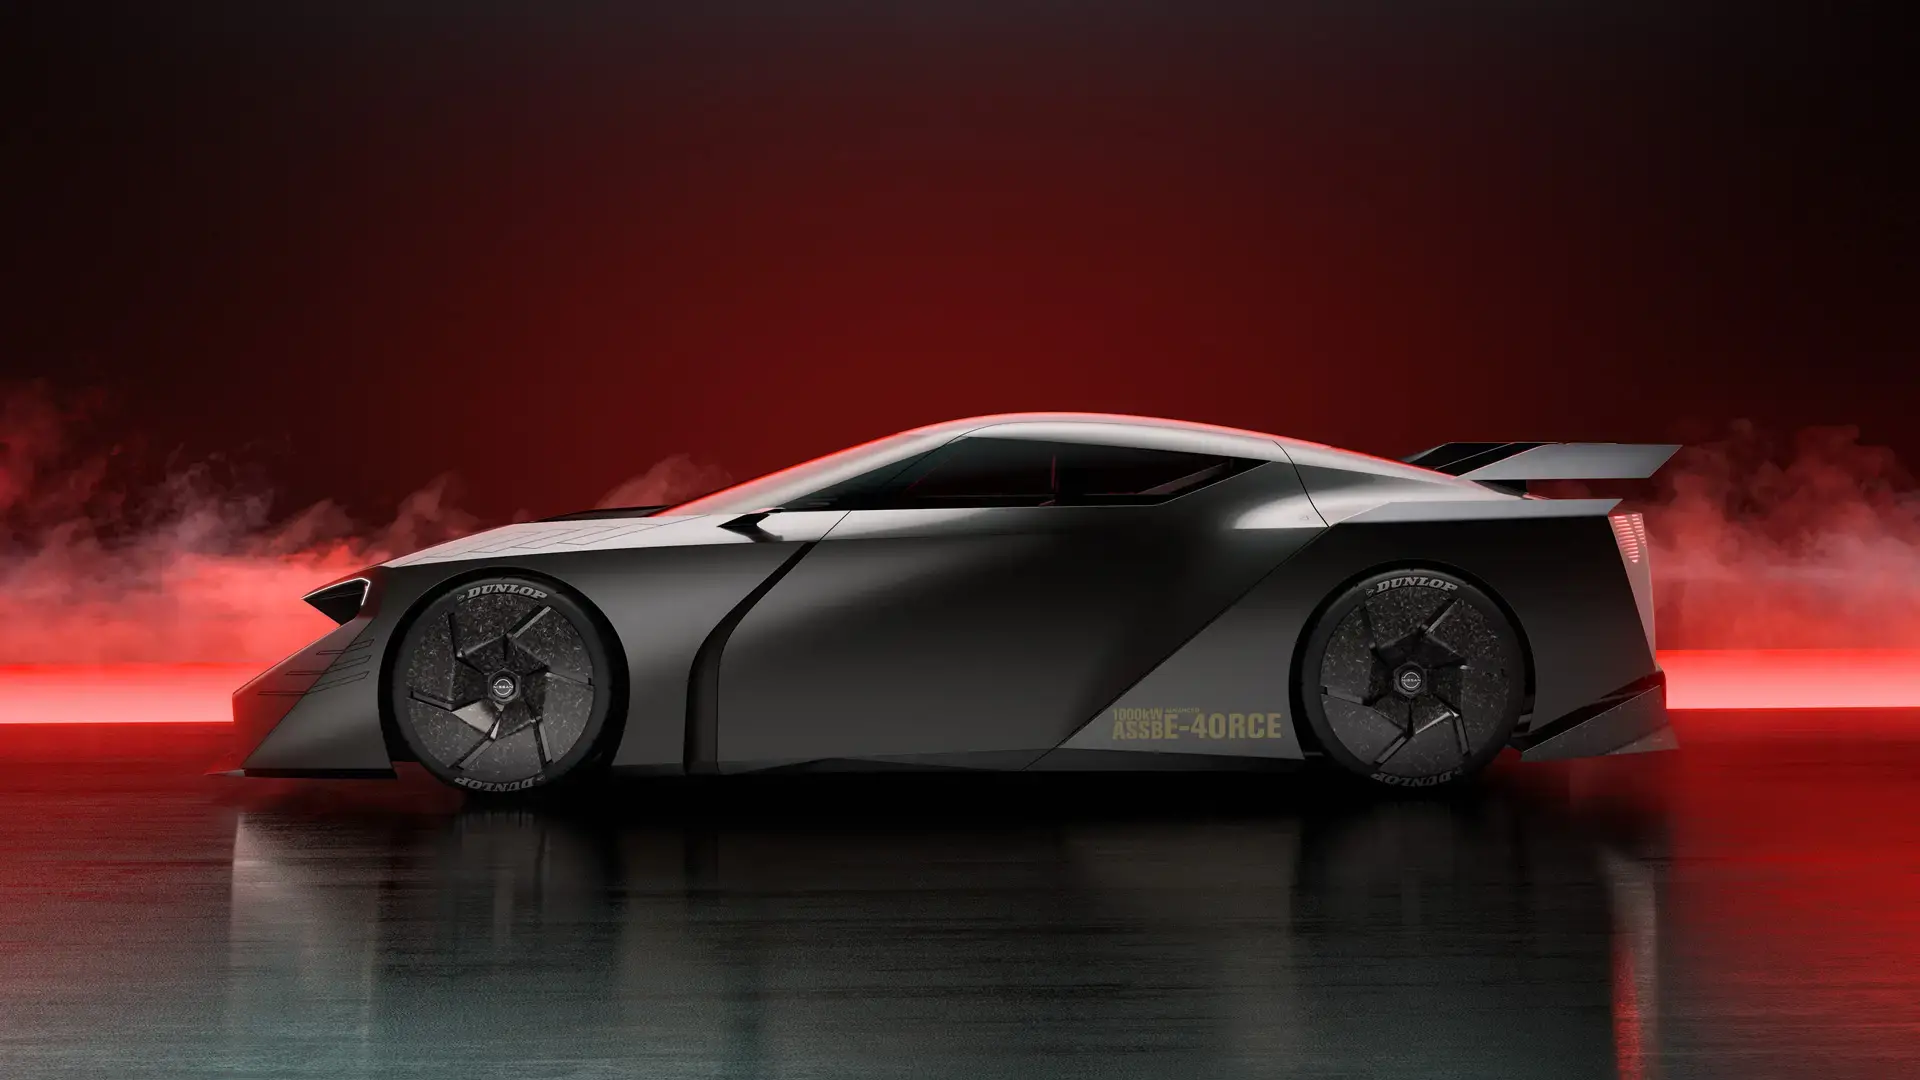 Next generation nissan gt r and z models confirmed by company leader